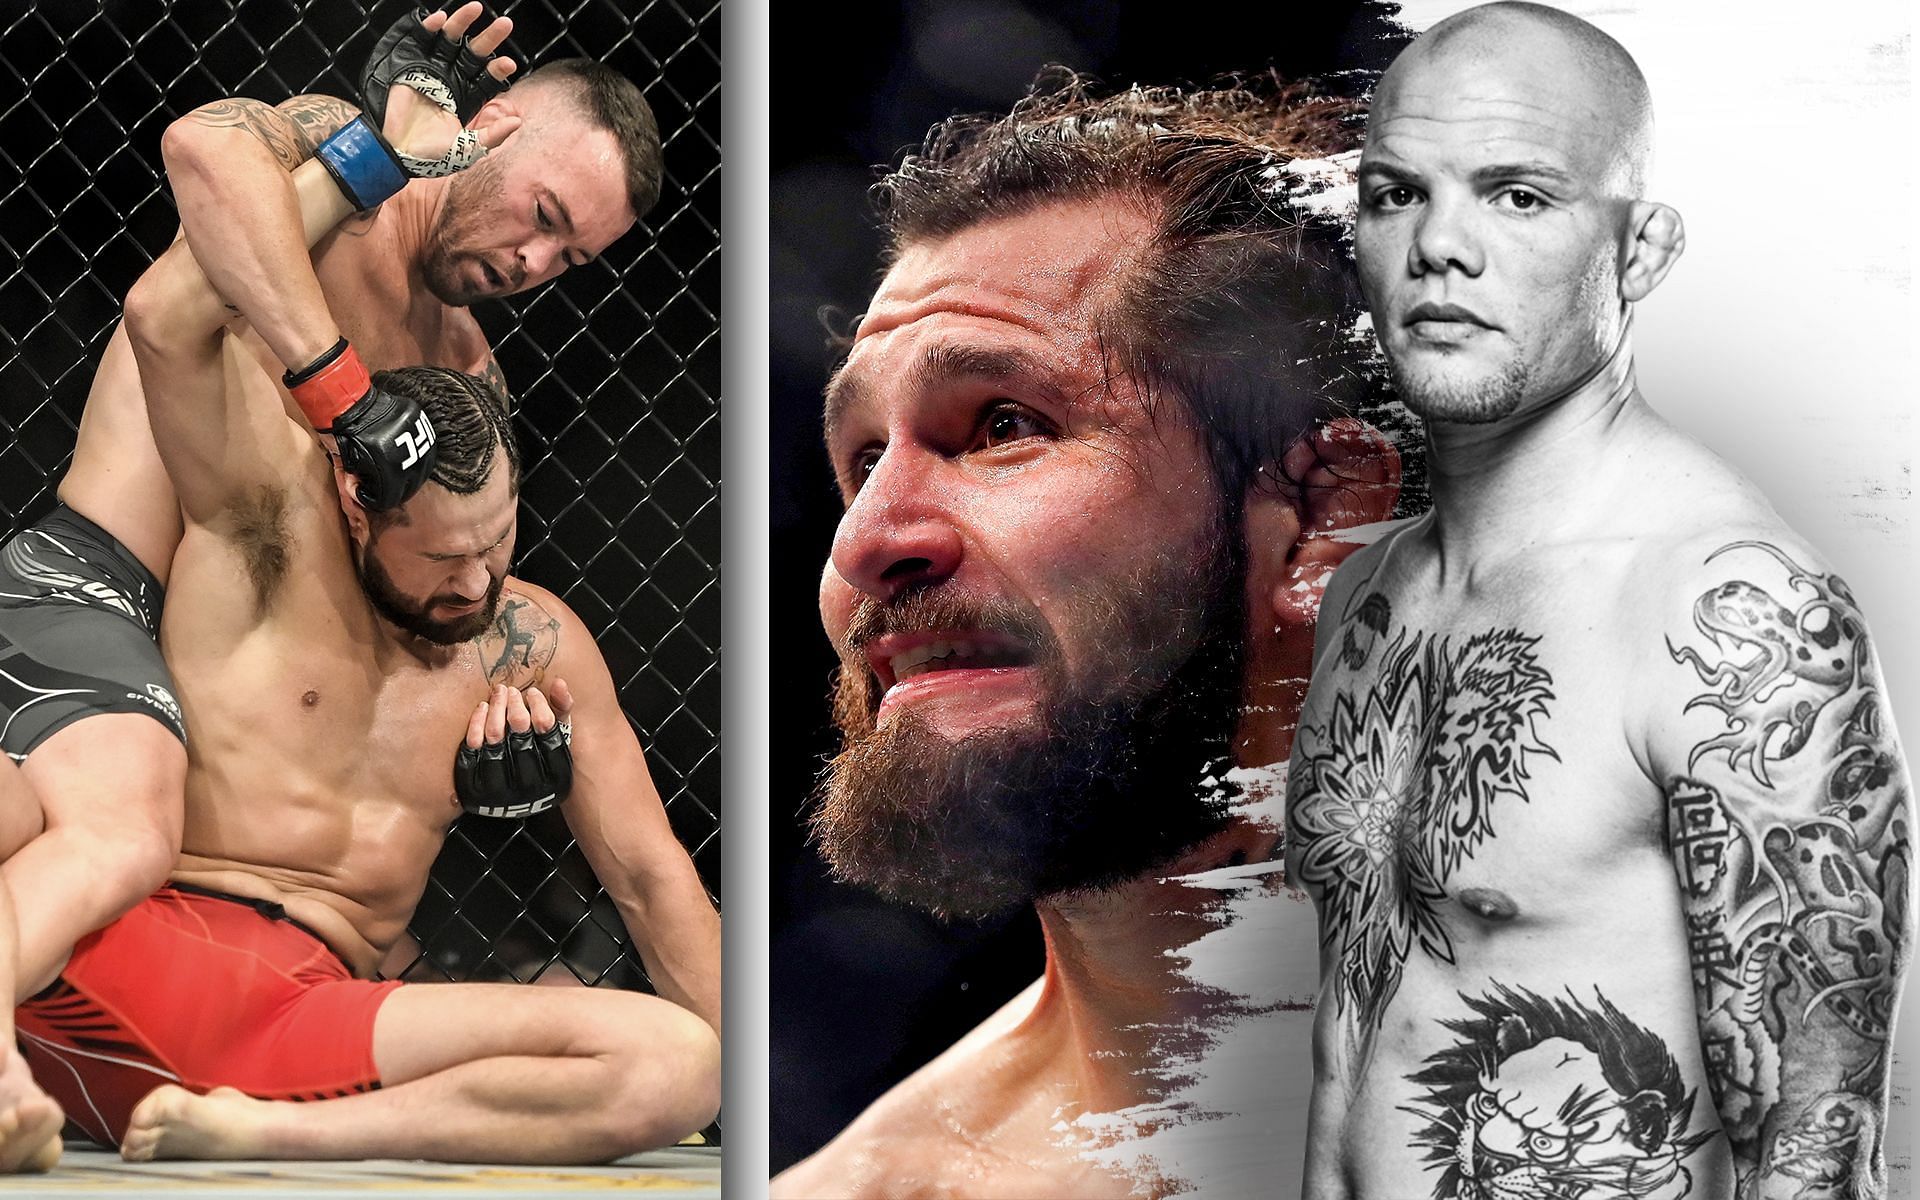 Anthony Smith weighs in on Colby Covington vs Jorge Masvidal [Image credits: Anthony Smith from ufc.com, back images from Getty]